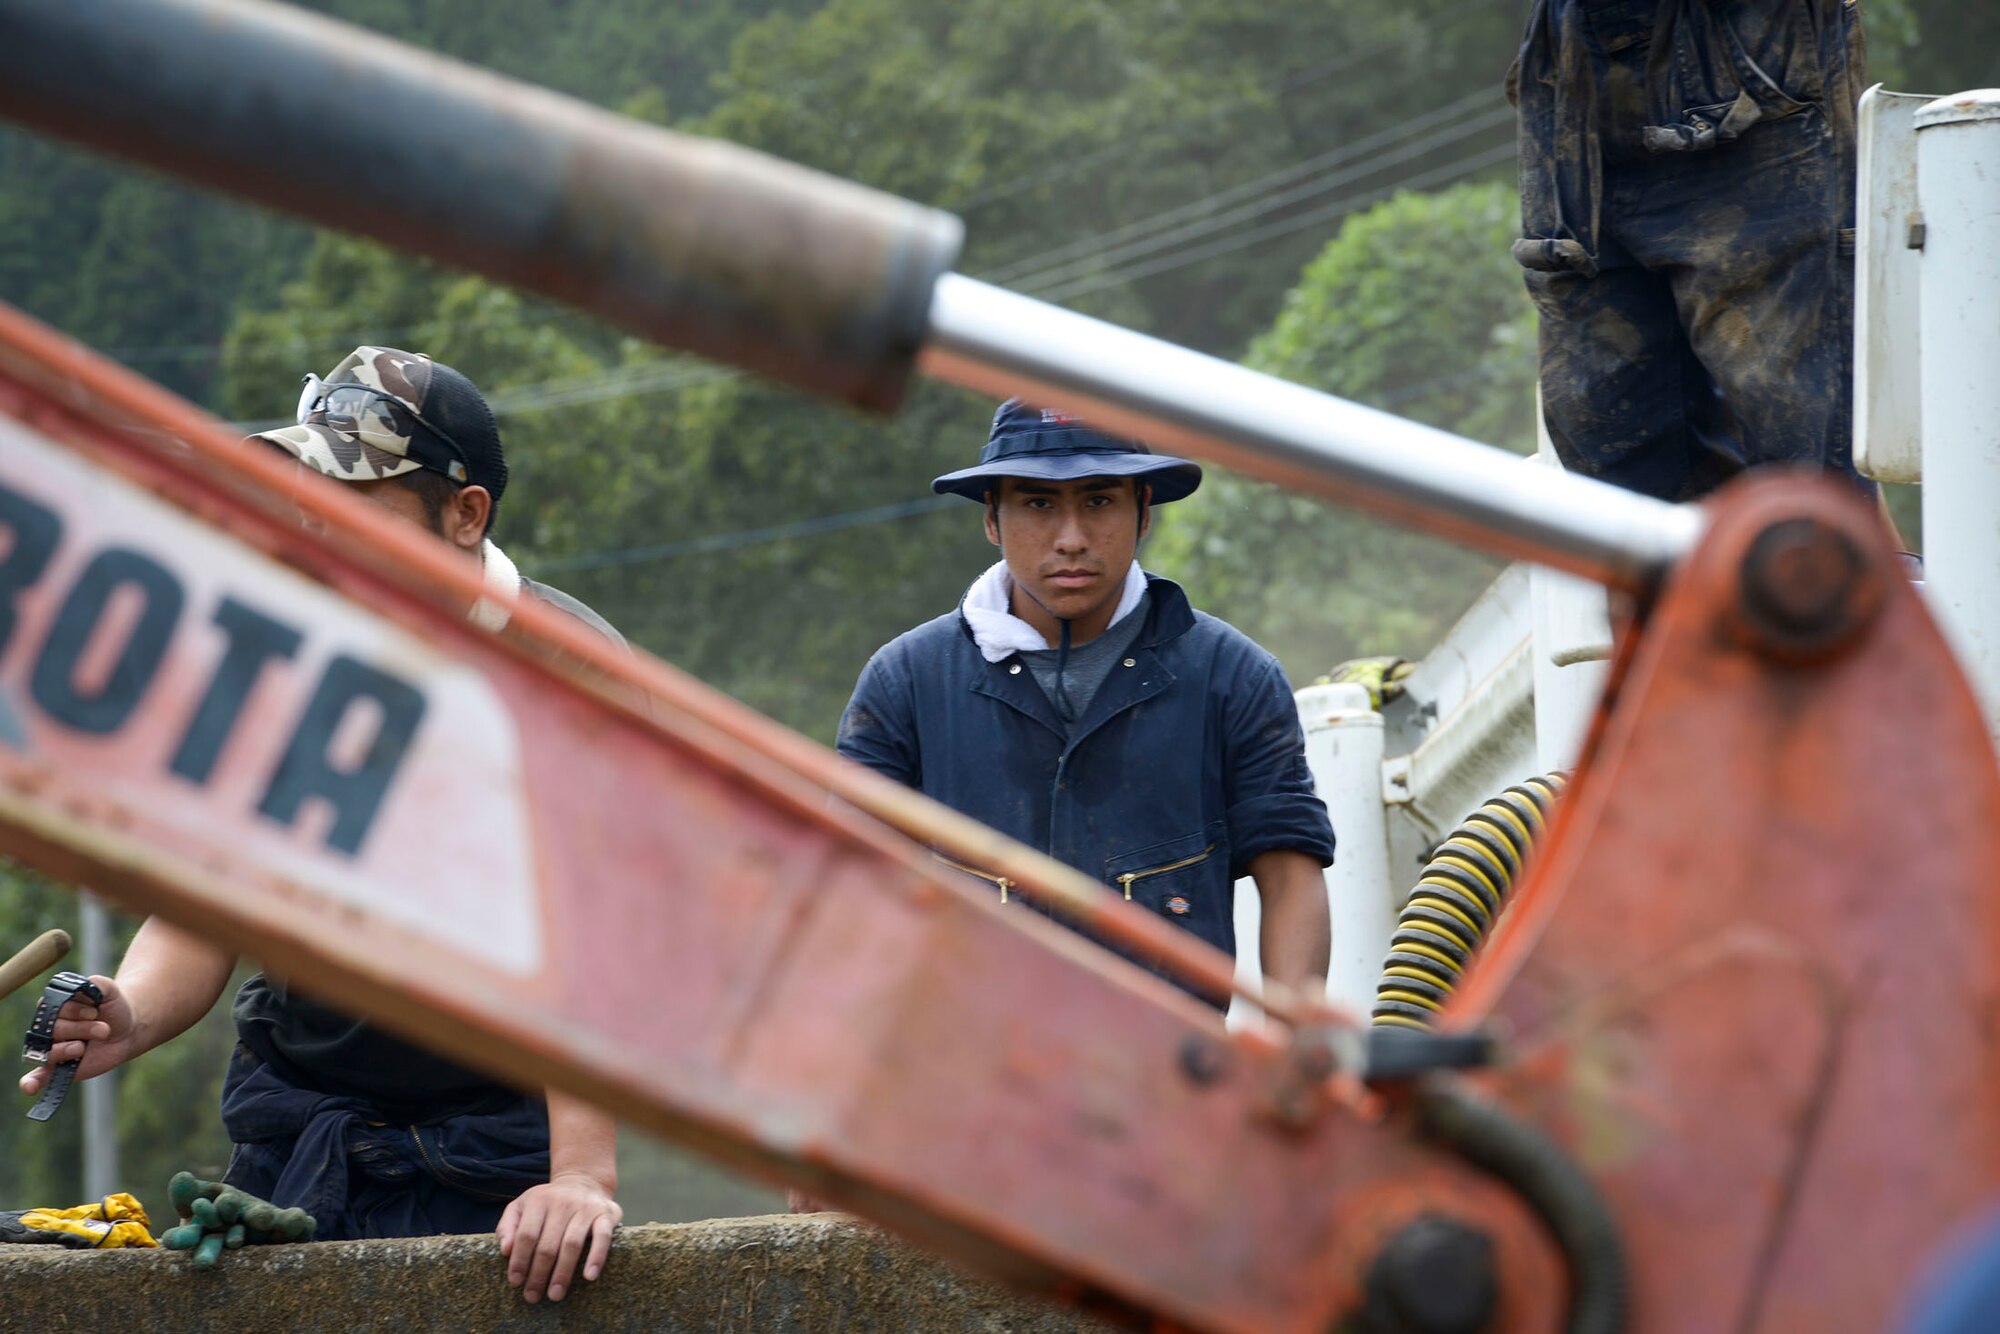 A 374th Civil Engineer Squadron fire protection member takes a break from digging
mud during flood relief at Kanuma City, Tochigi prefecture, Japan, Sept. 15, 2015. More
than 60 volunteers, Airmen and Japanese who work at Yokota Air Base, ventured to the
prefecture to help local residents restore their properties. Ten days of rain led to mass
flooding and many landslides that damaged personal and public property. (U.S. Air
Force photo by Staff Sgt. Cody H. Ramirez/Released)